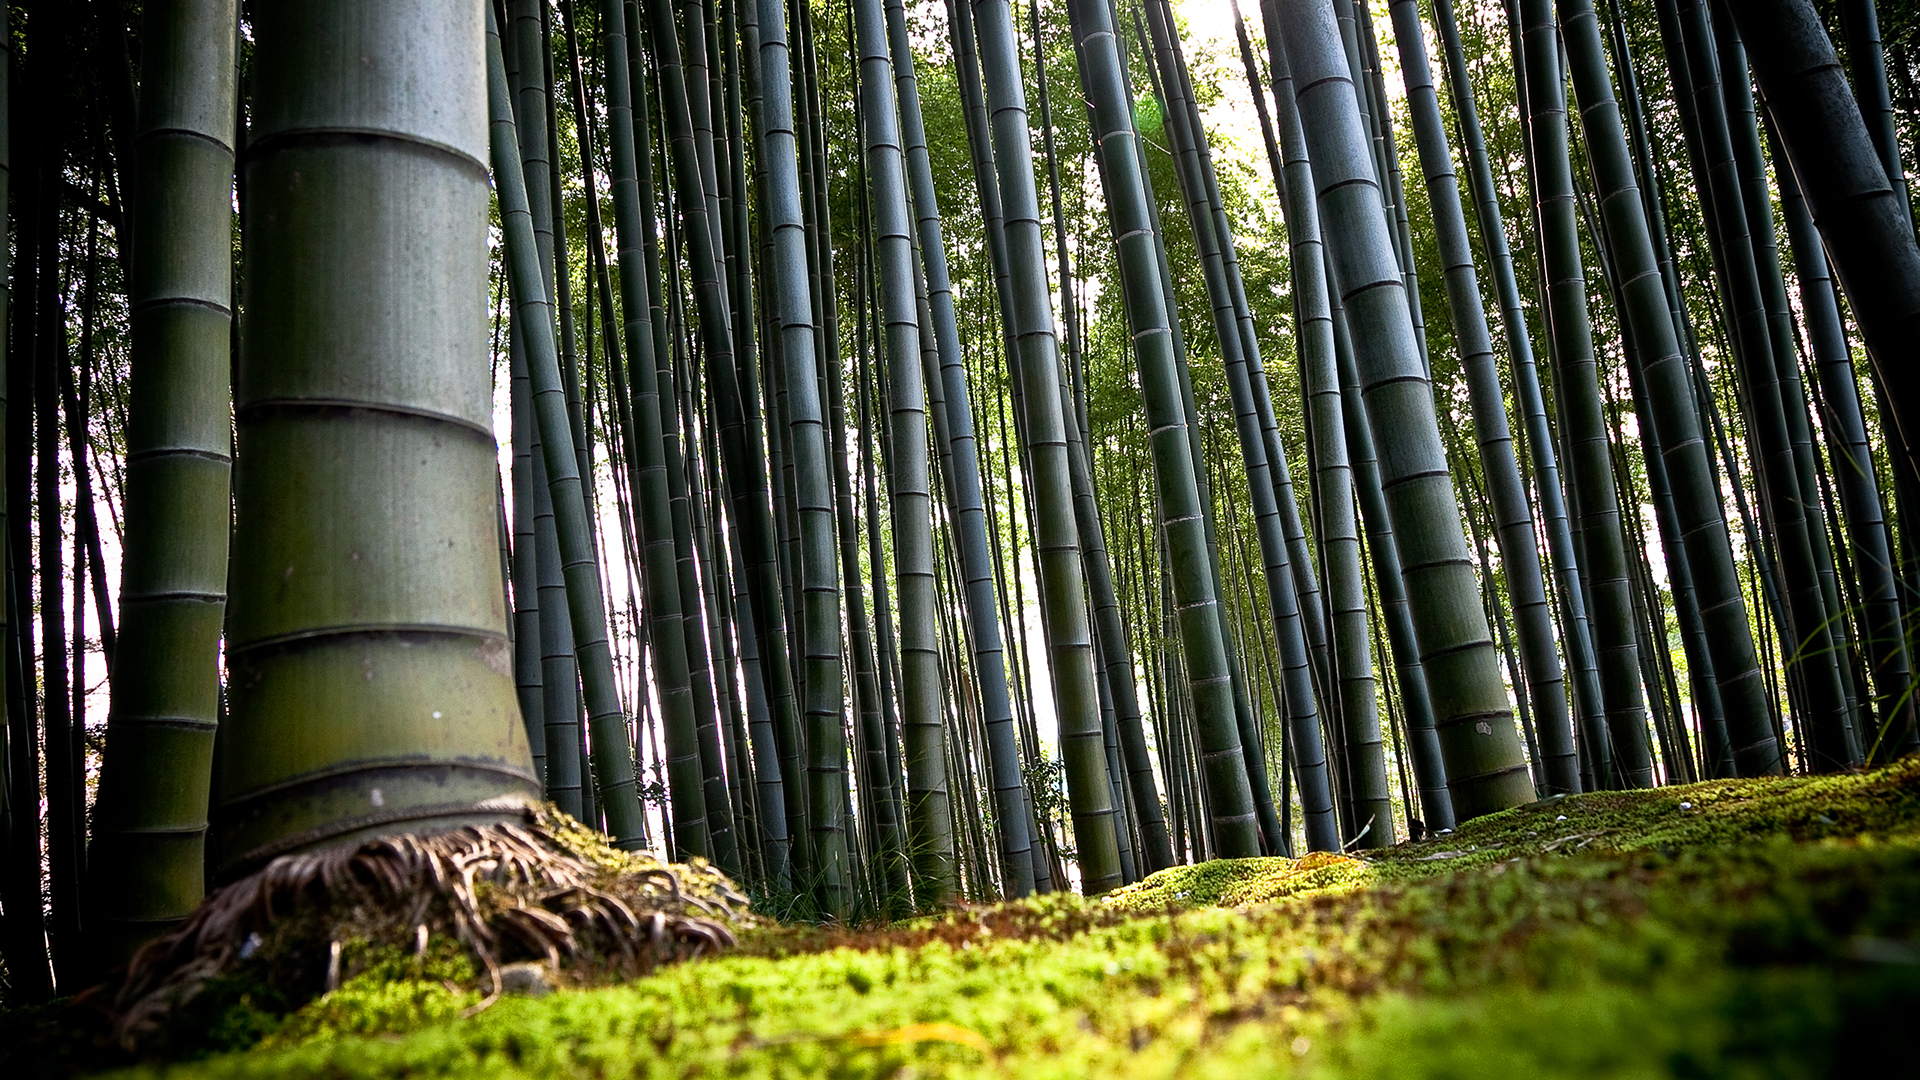 earth, bamboo, forest, tree